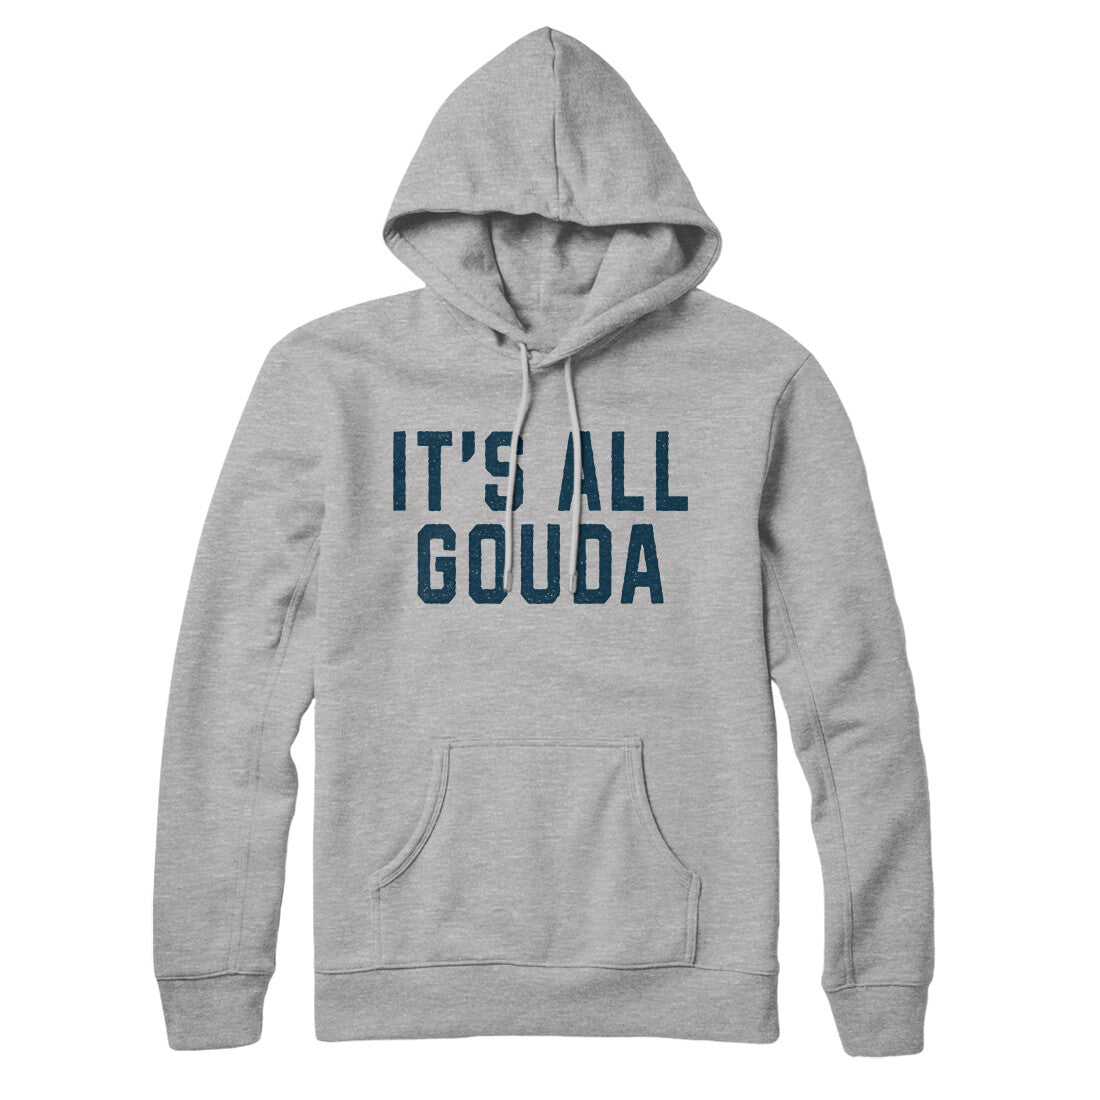 It’s All Gouda in Heather Grey Color